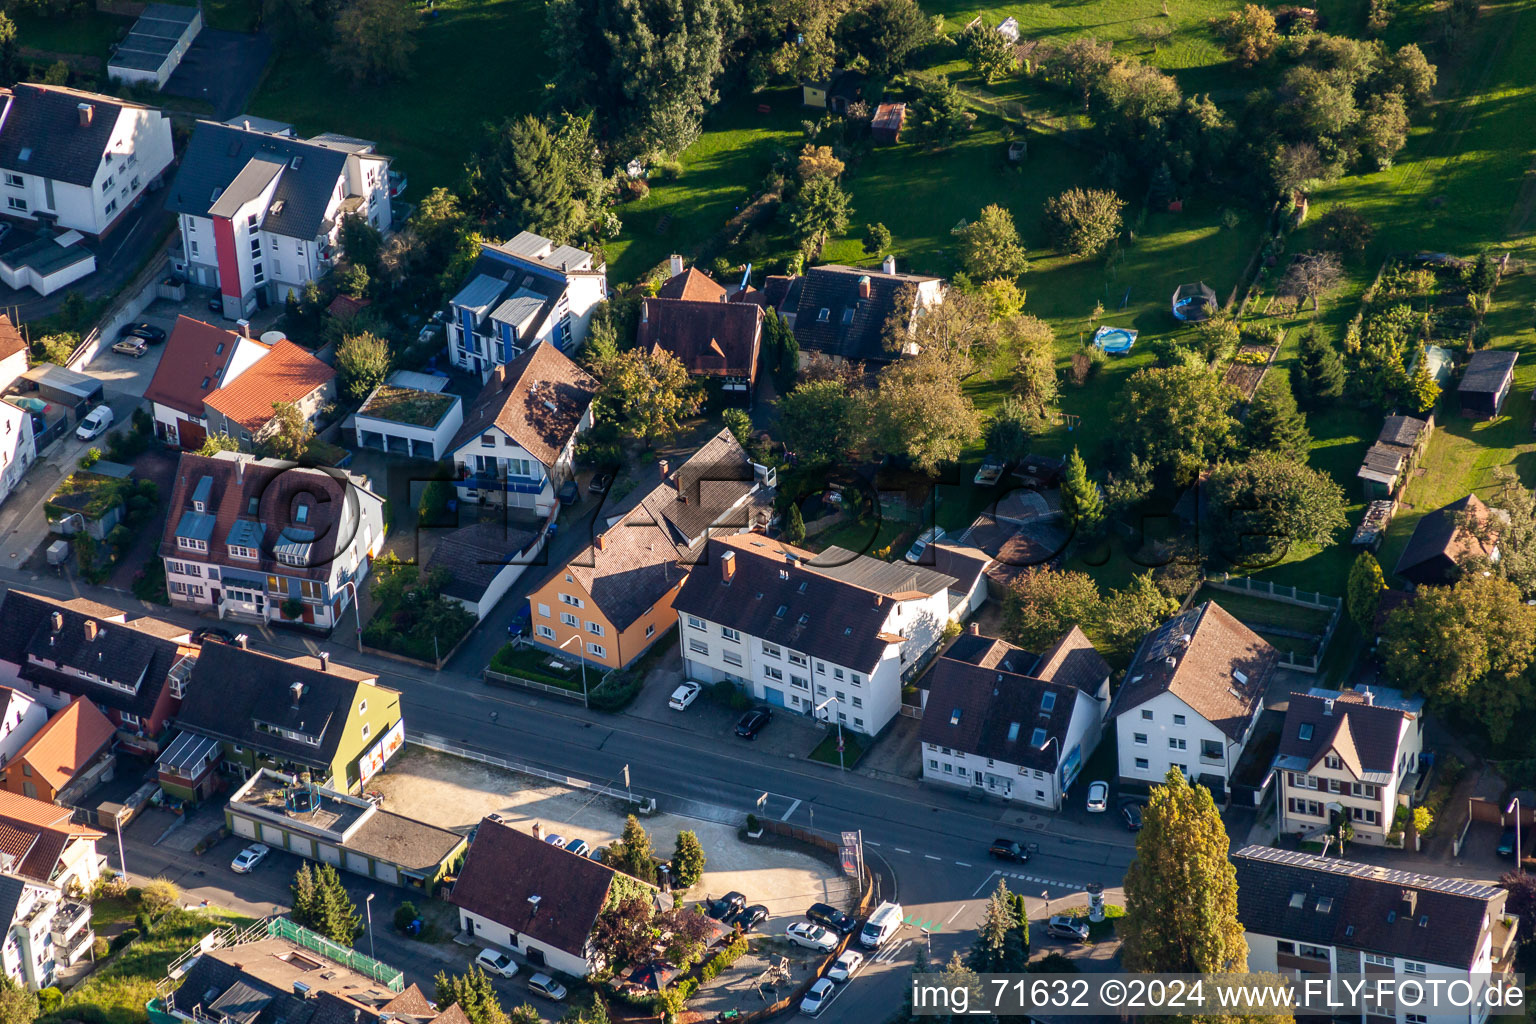 District Wollmatingen in Konstanz in the state Baden-Wuerttemberg, Germany from above